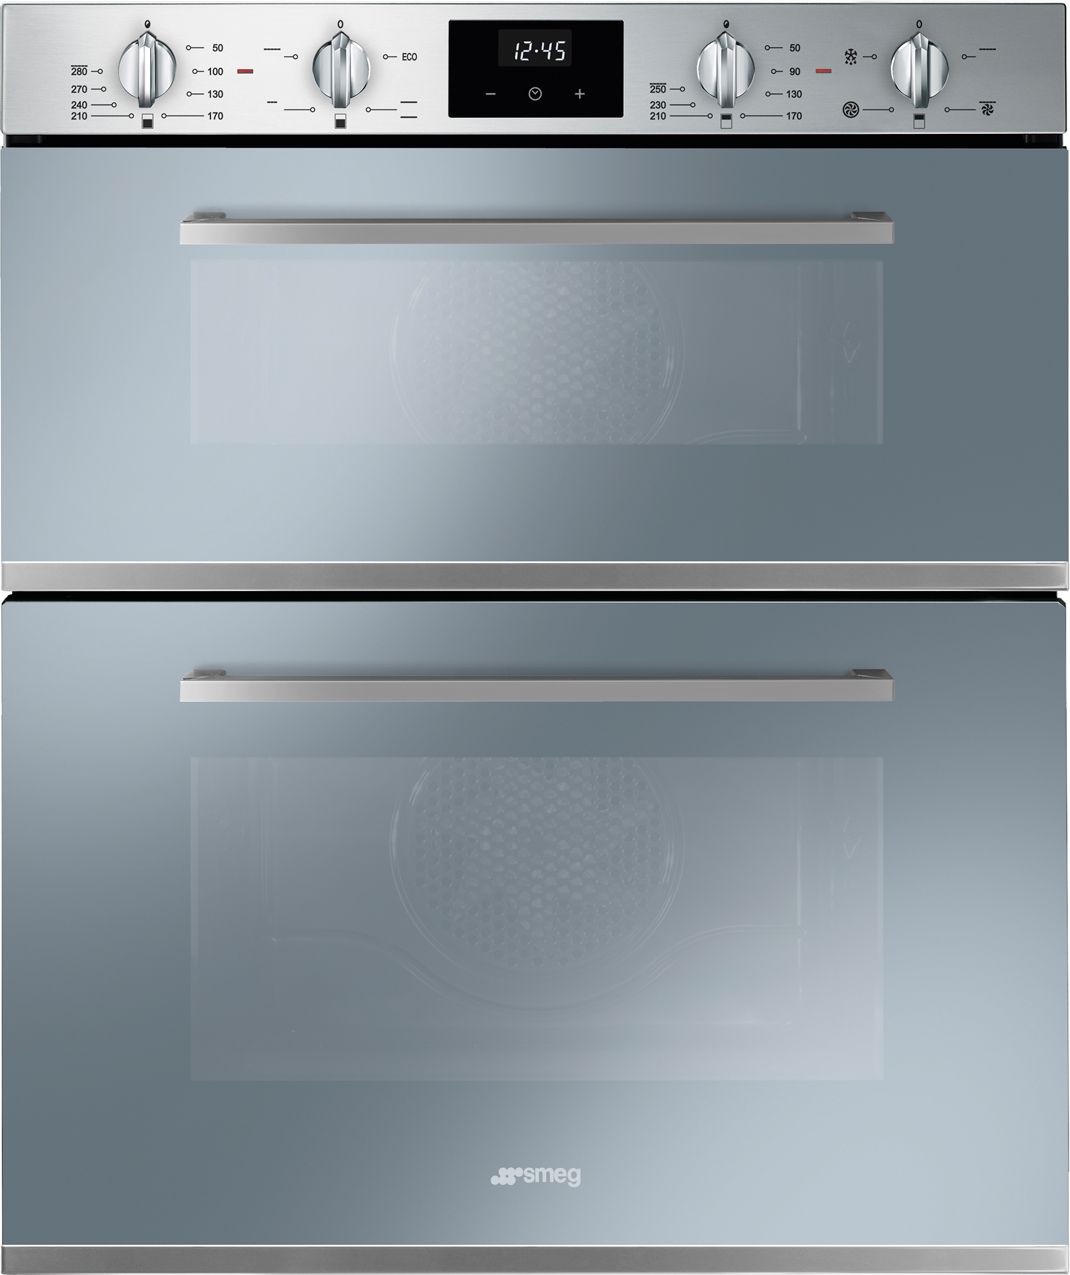 Smeg Cucina DUSF400S Built Under Electric Double Oven - Stainless Steel - A/B Rated, Stainless Steel